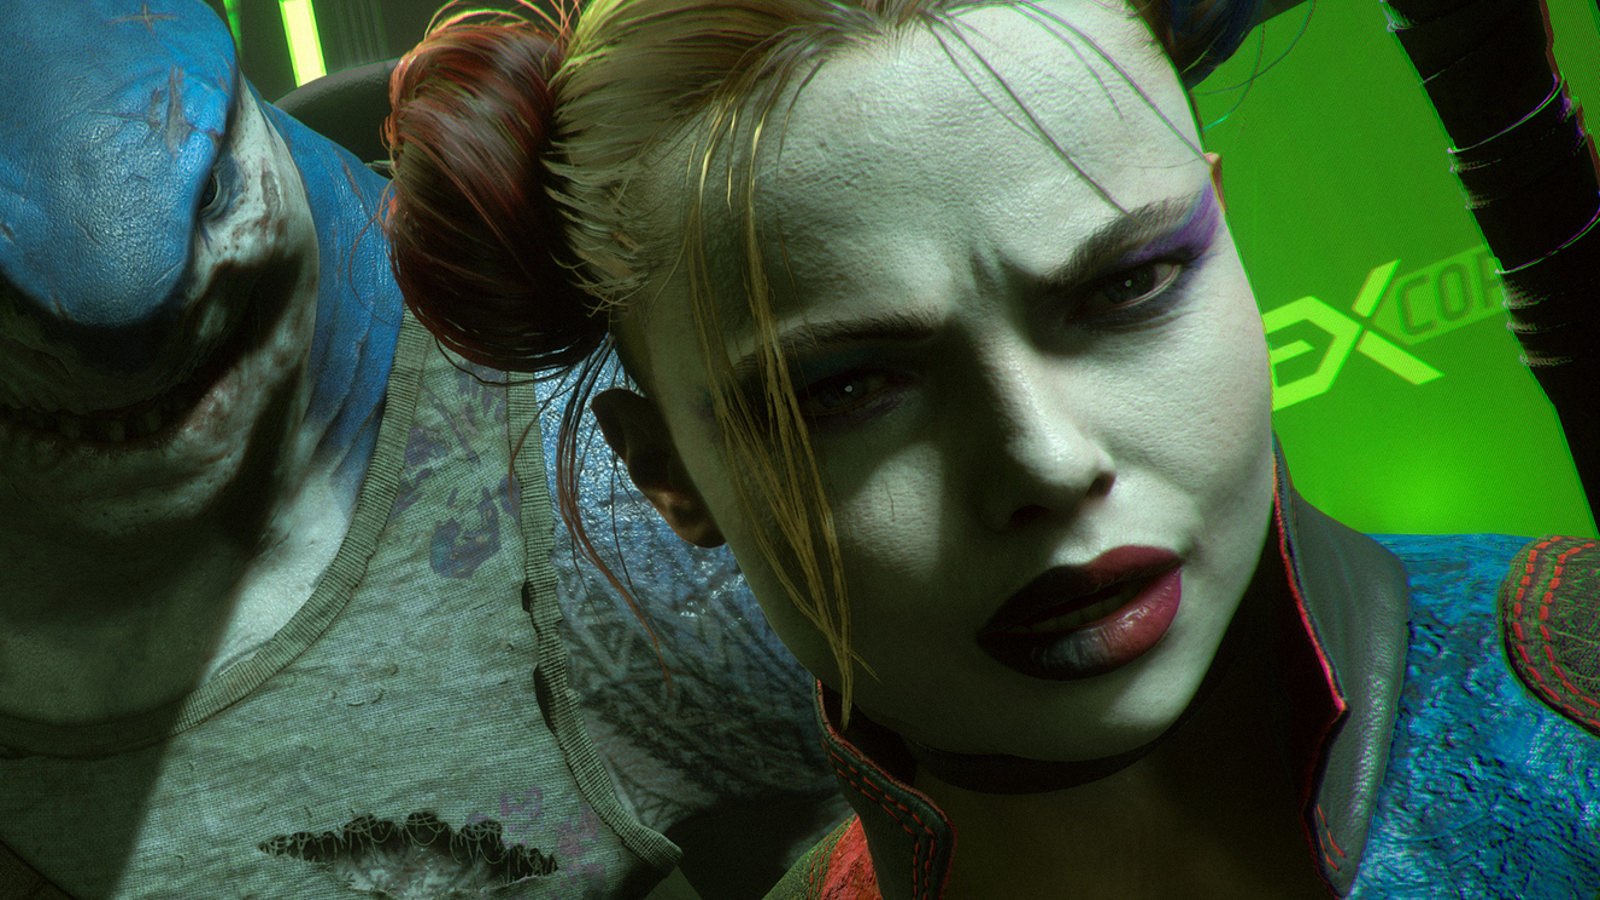 Suicide Squad delayed into 2023, report claims